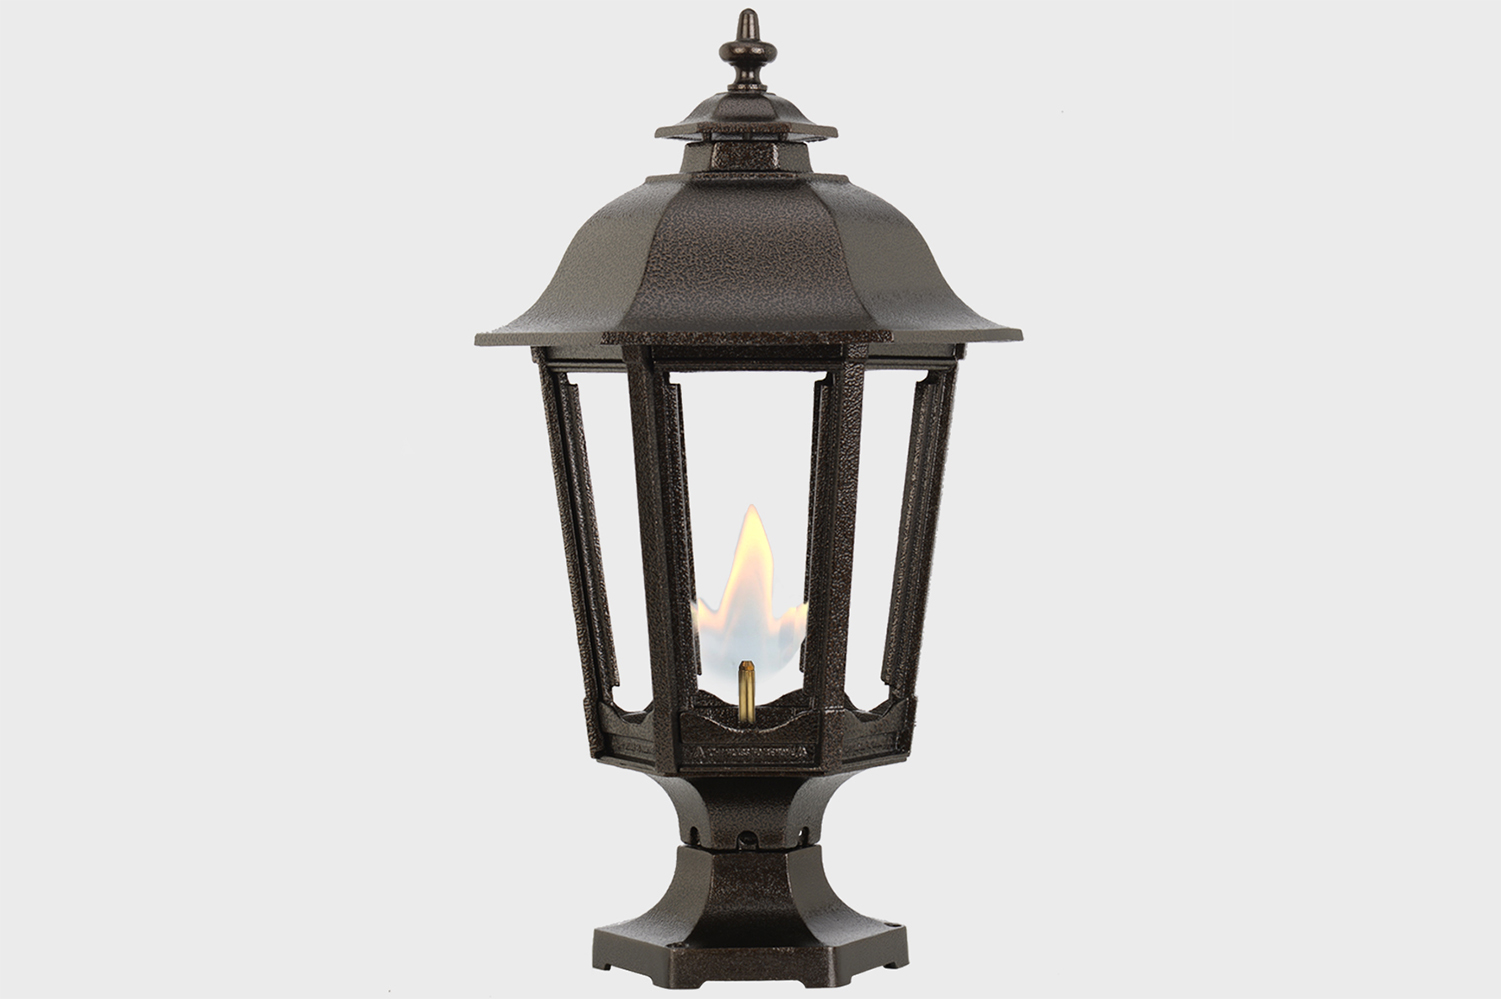 Bavarian Gas Light from american gas lamps open flame